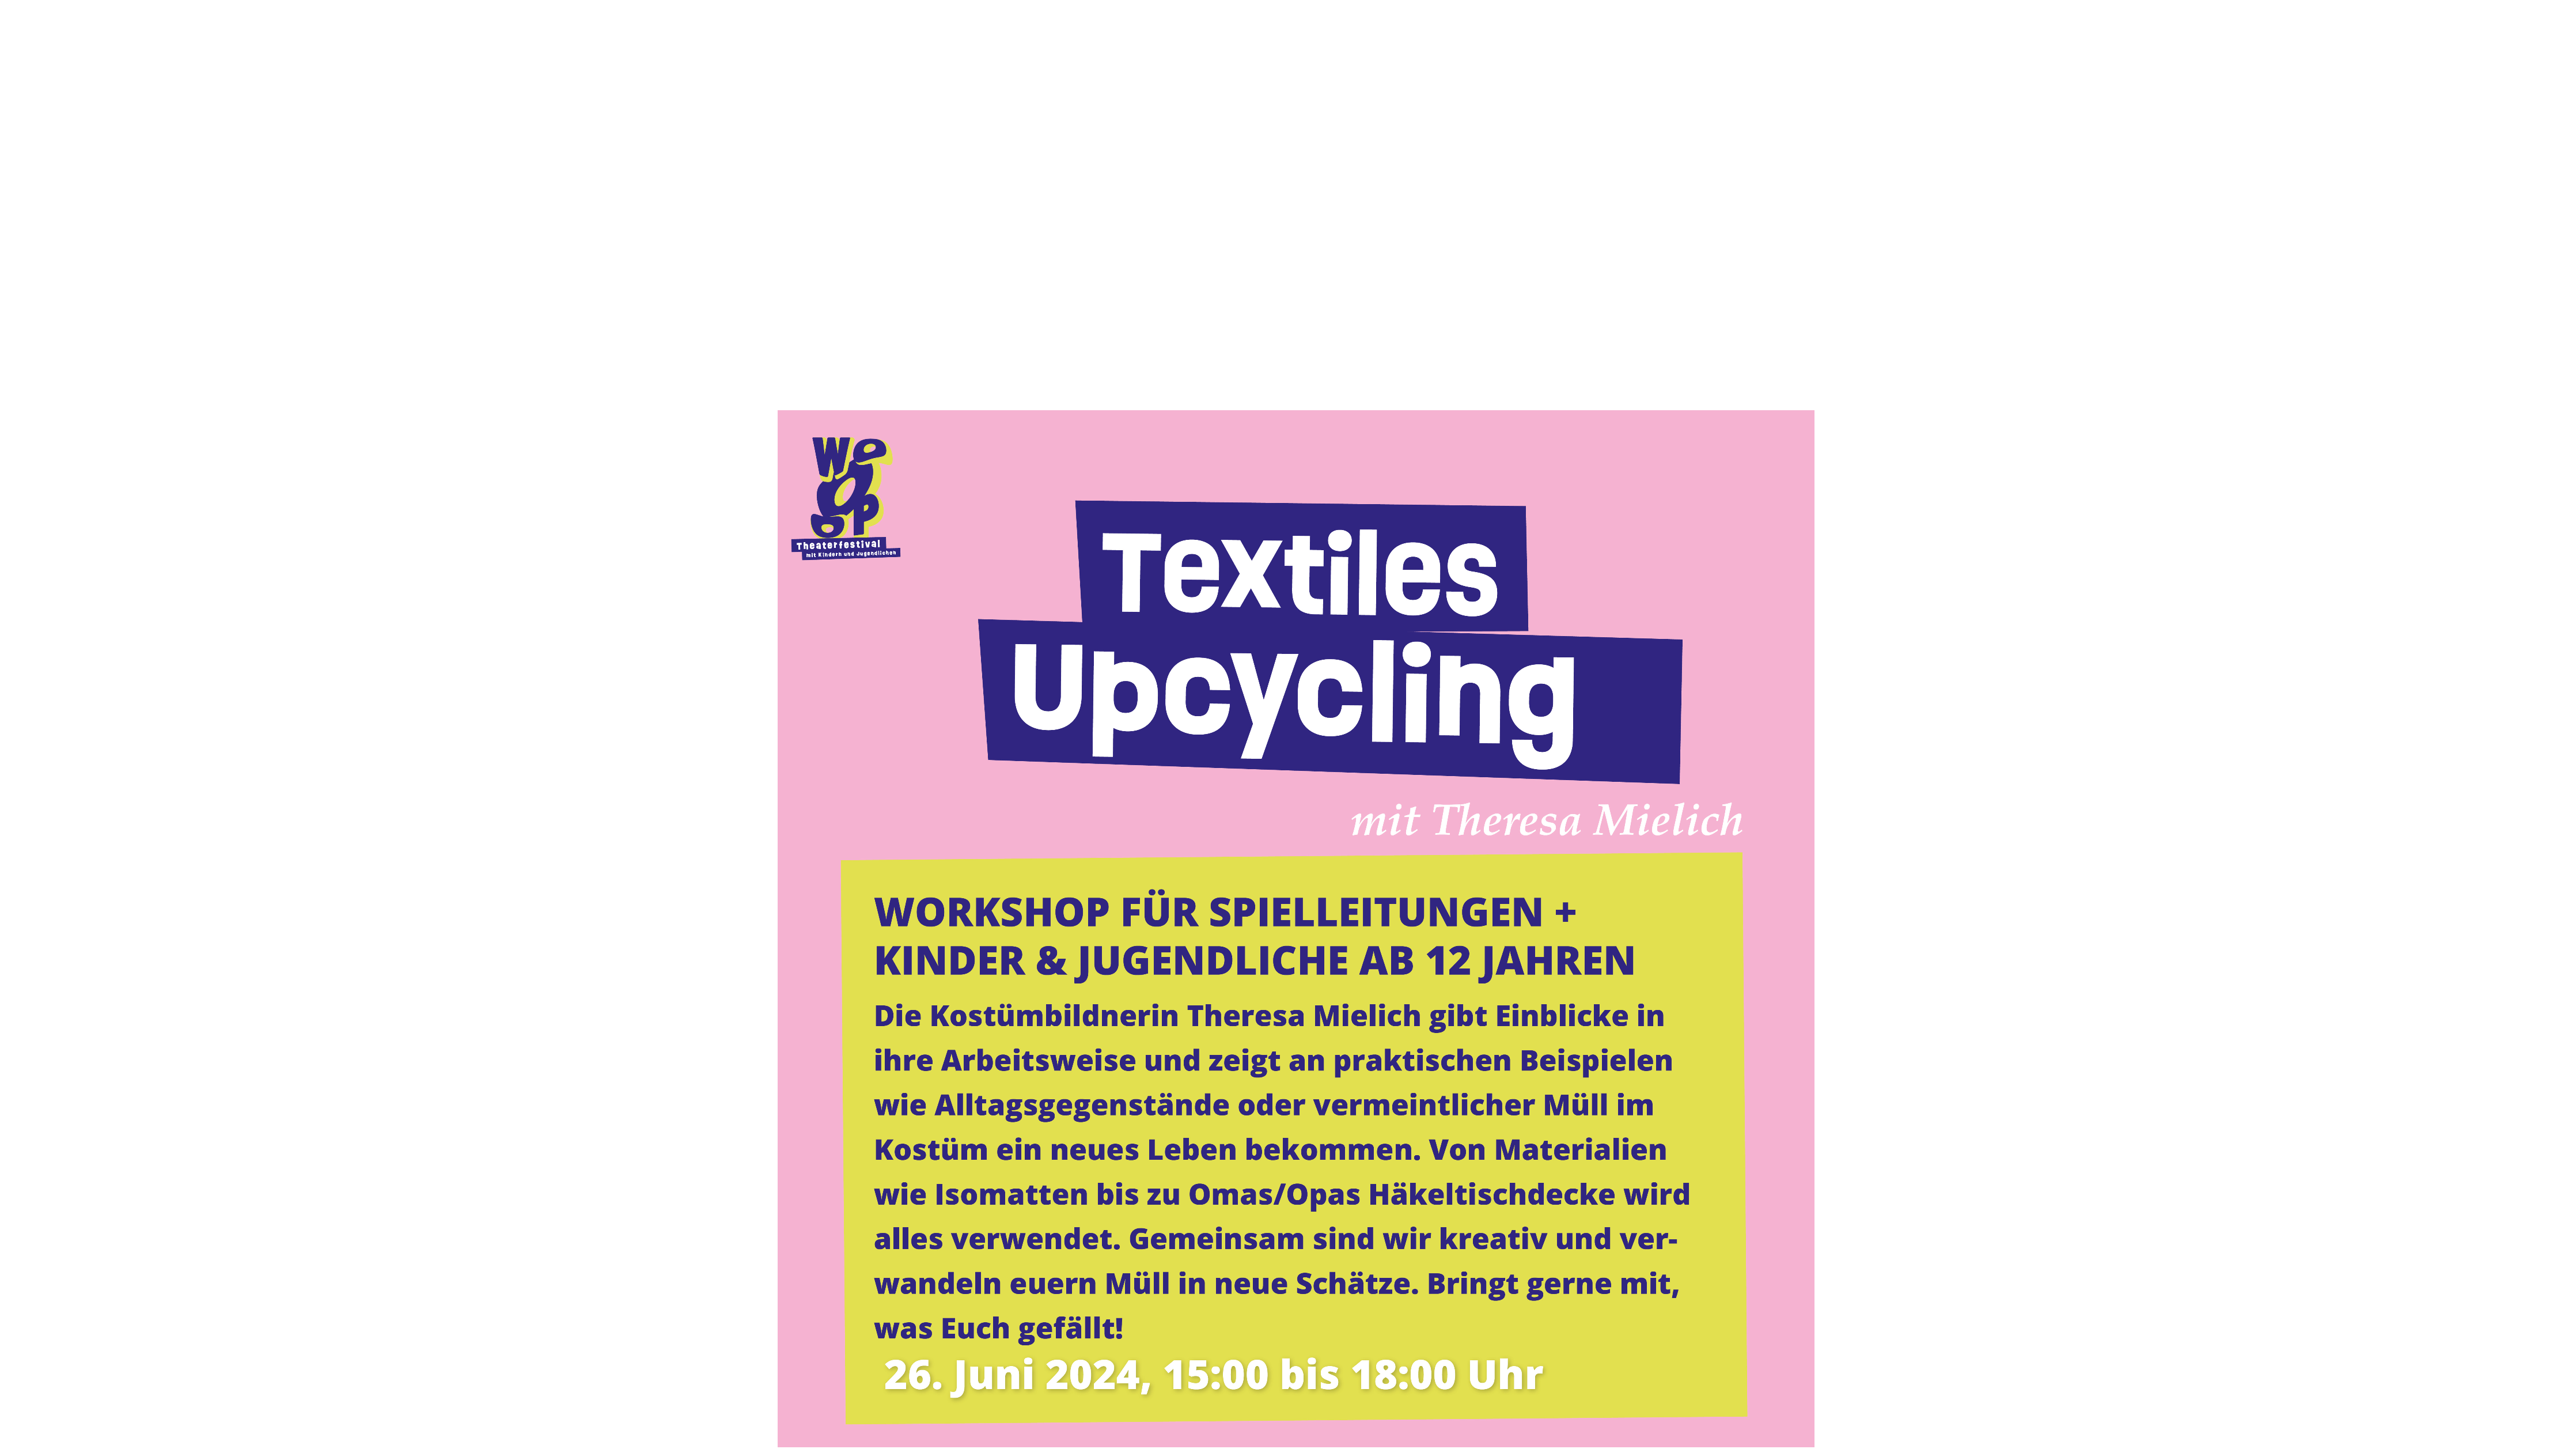 Textiles Upcycling Wooop Theaterfestival